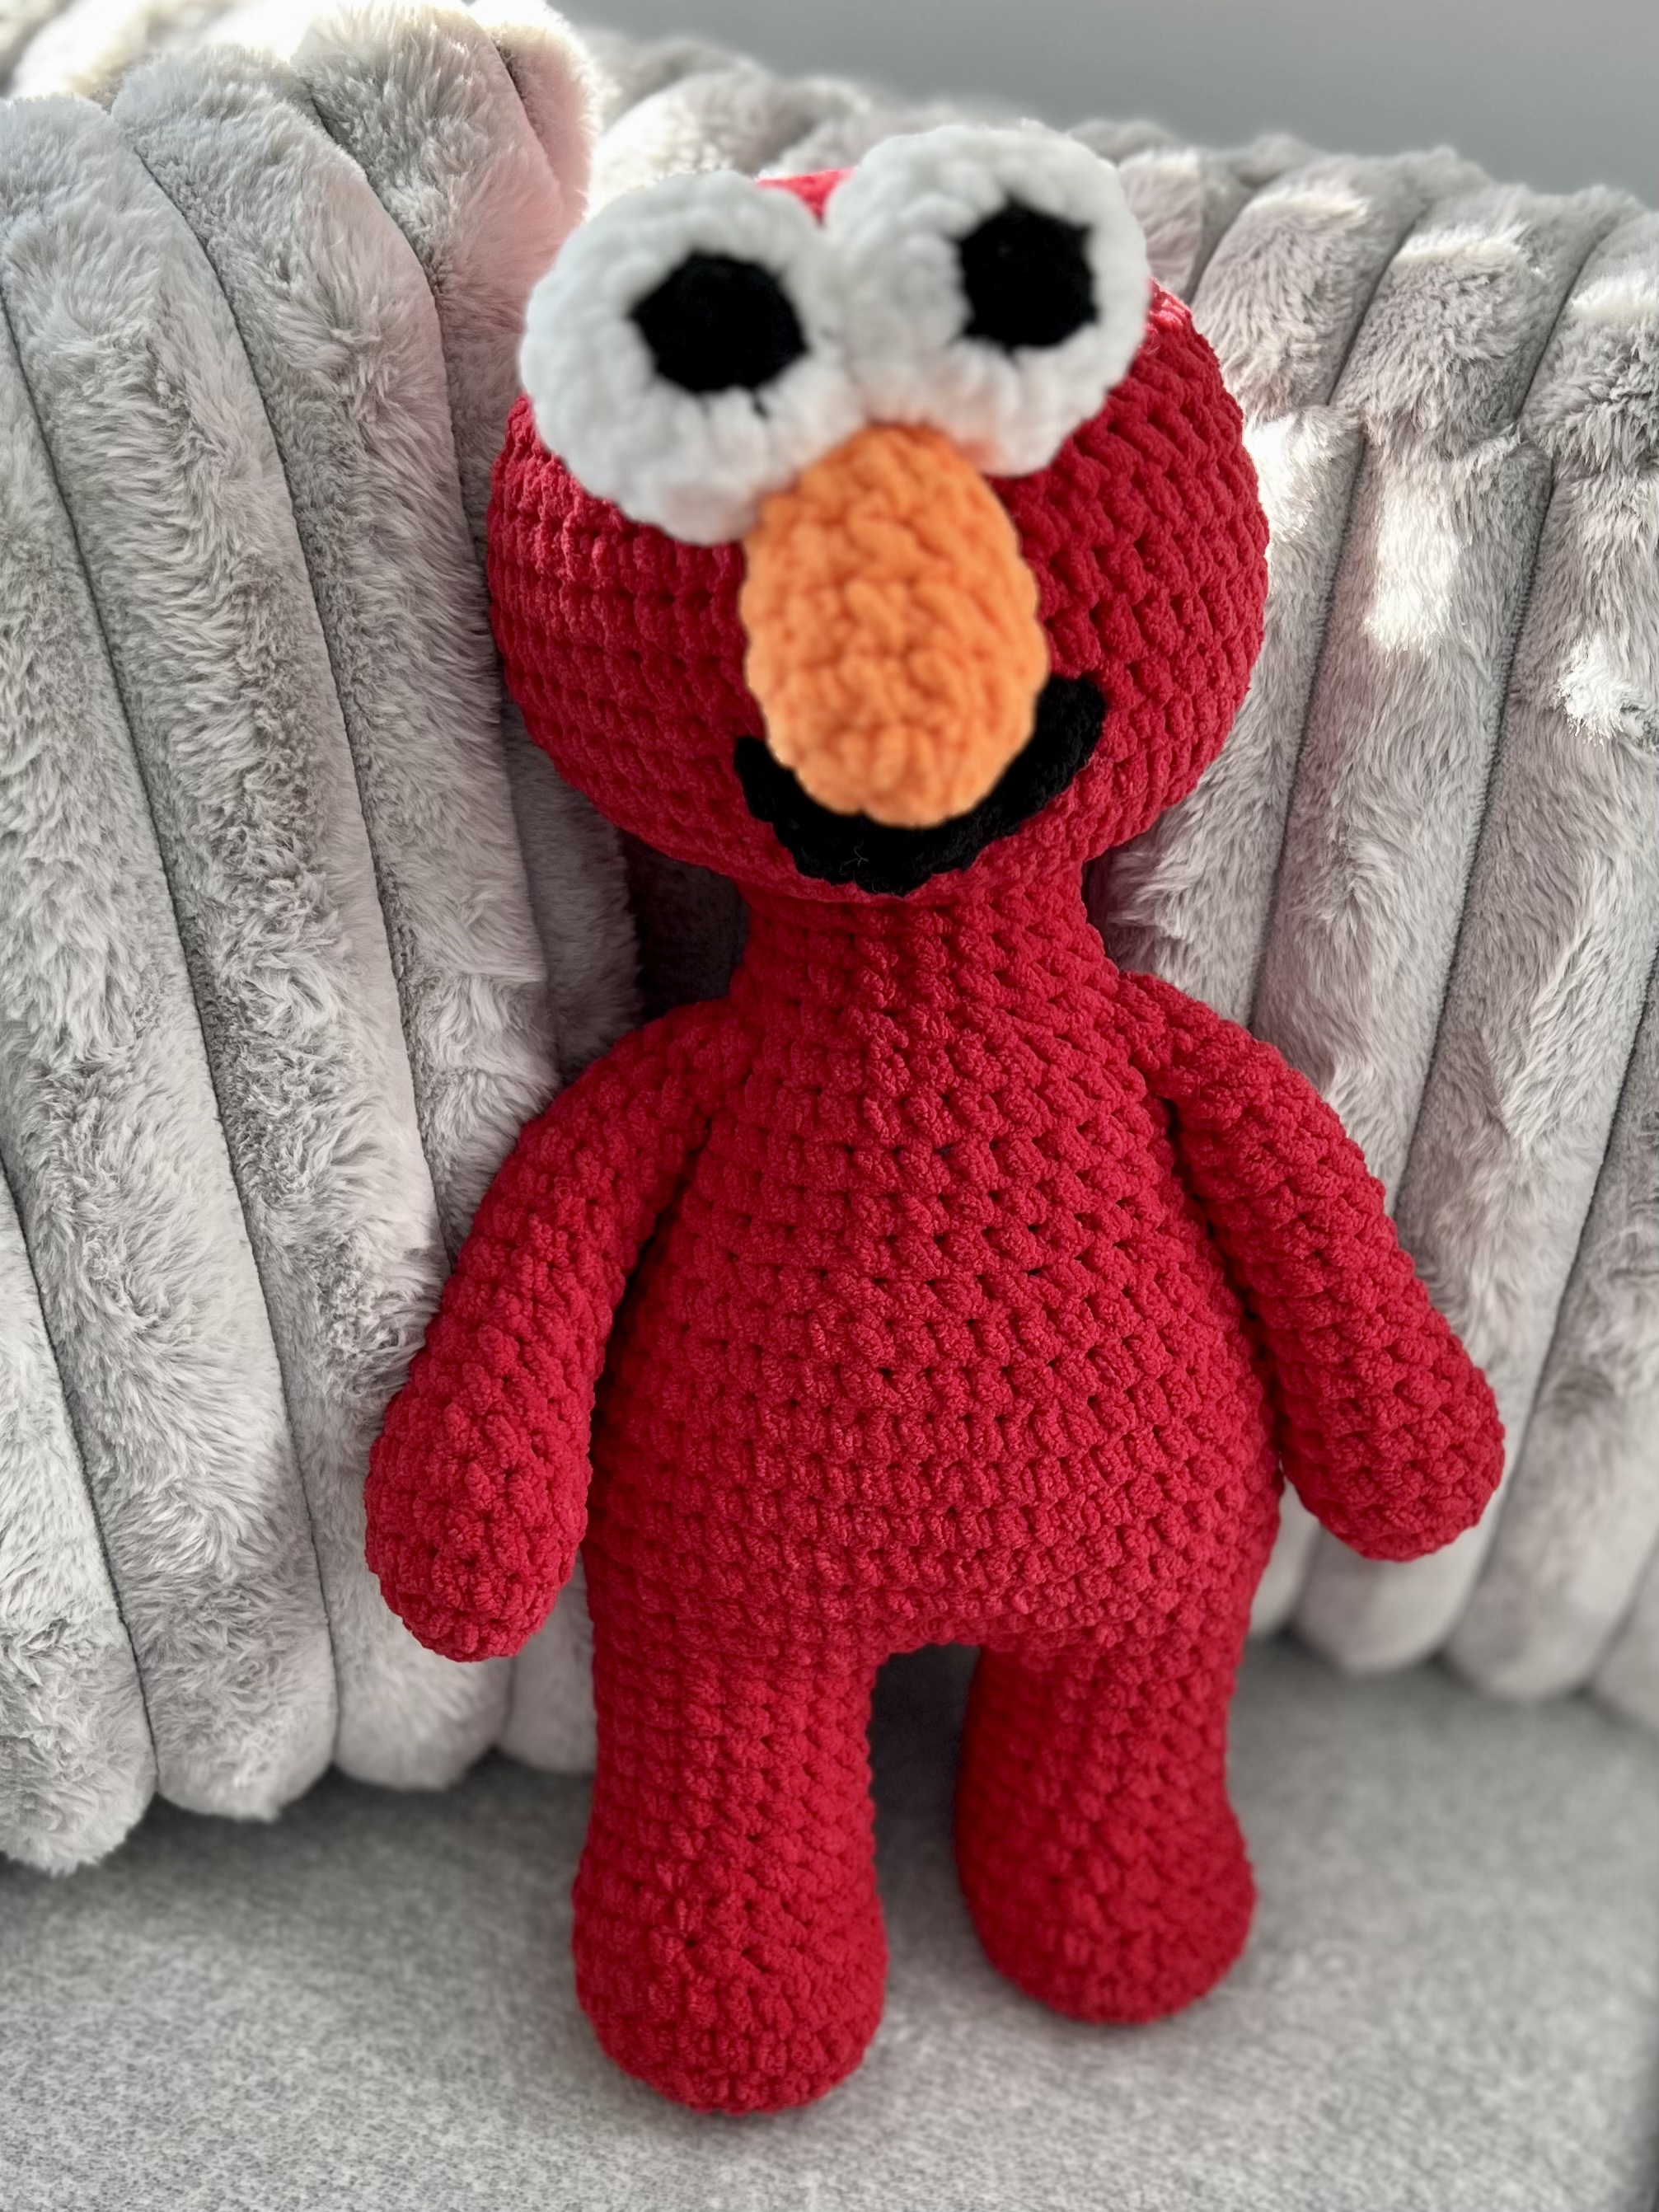 This Elmo Buddy is made with love by Classy Crafty Wife! Shop more unique gift ideas today with Spots Initiatives, the best way to support creators.